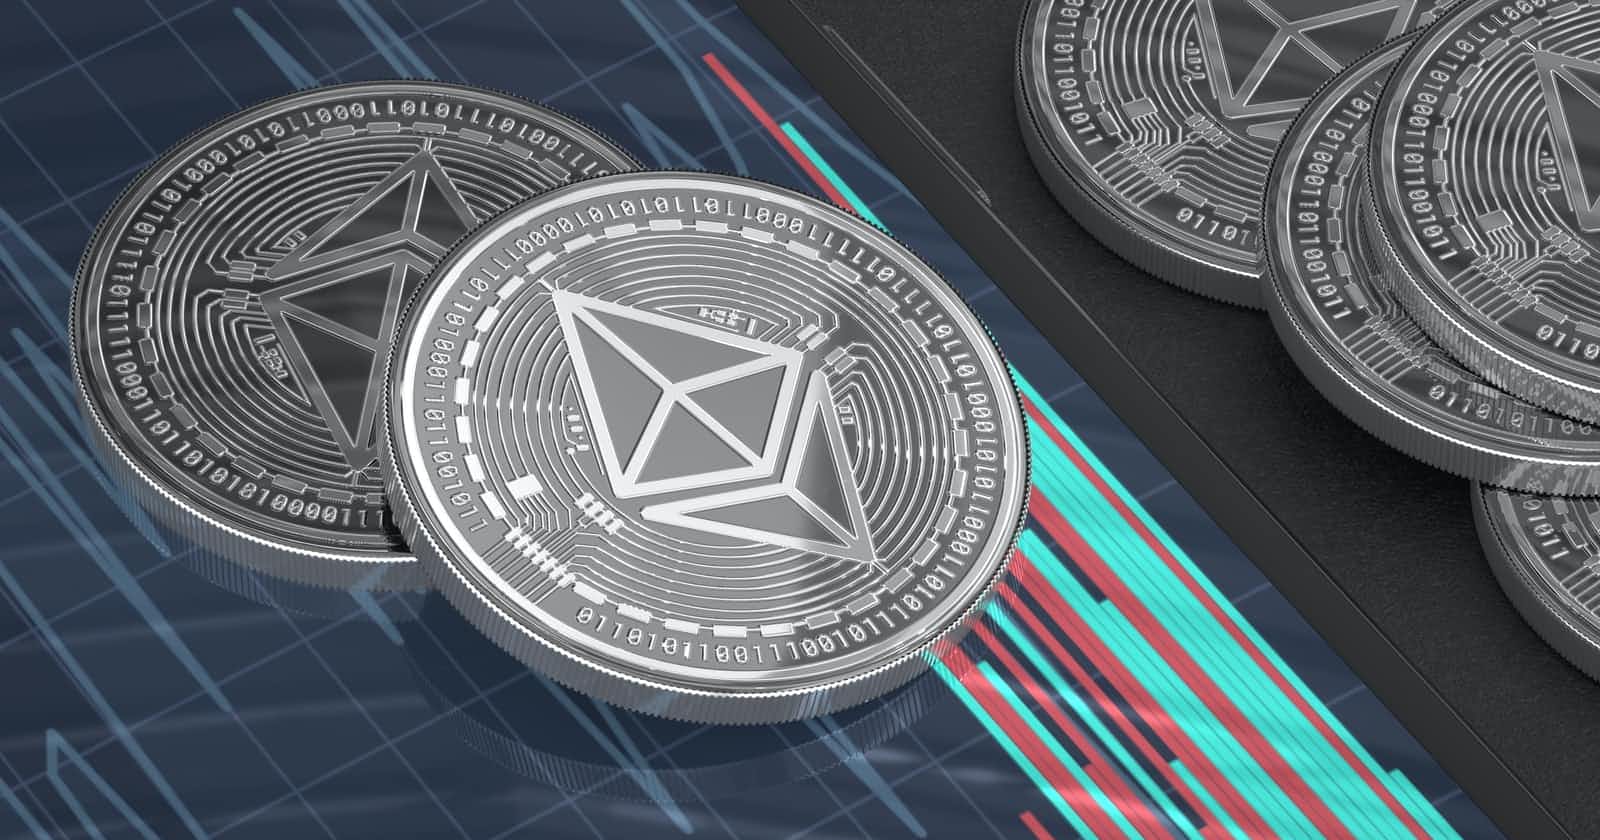 What is Ethereum, and how is it better than Bitcoin?